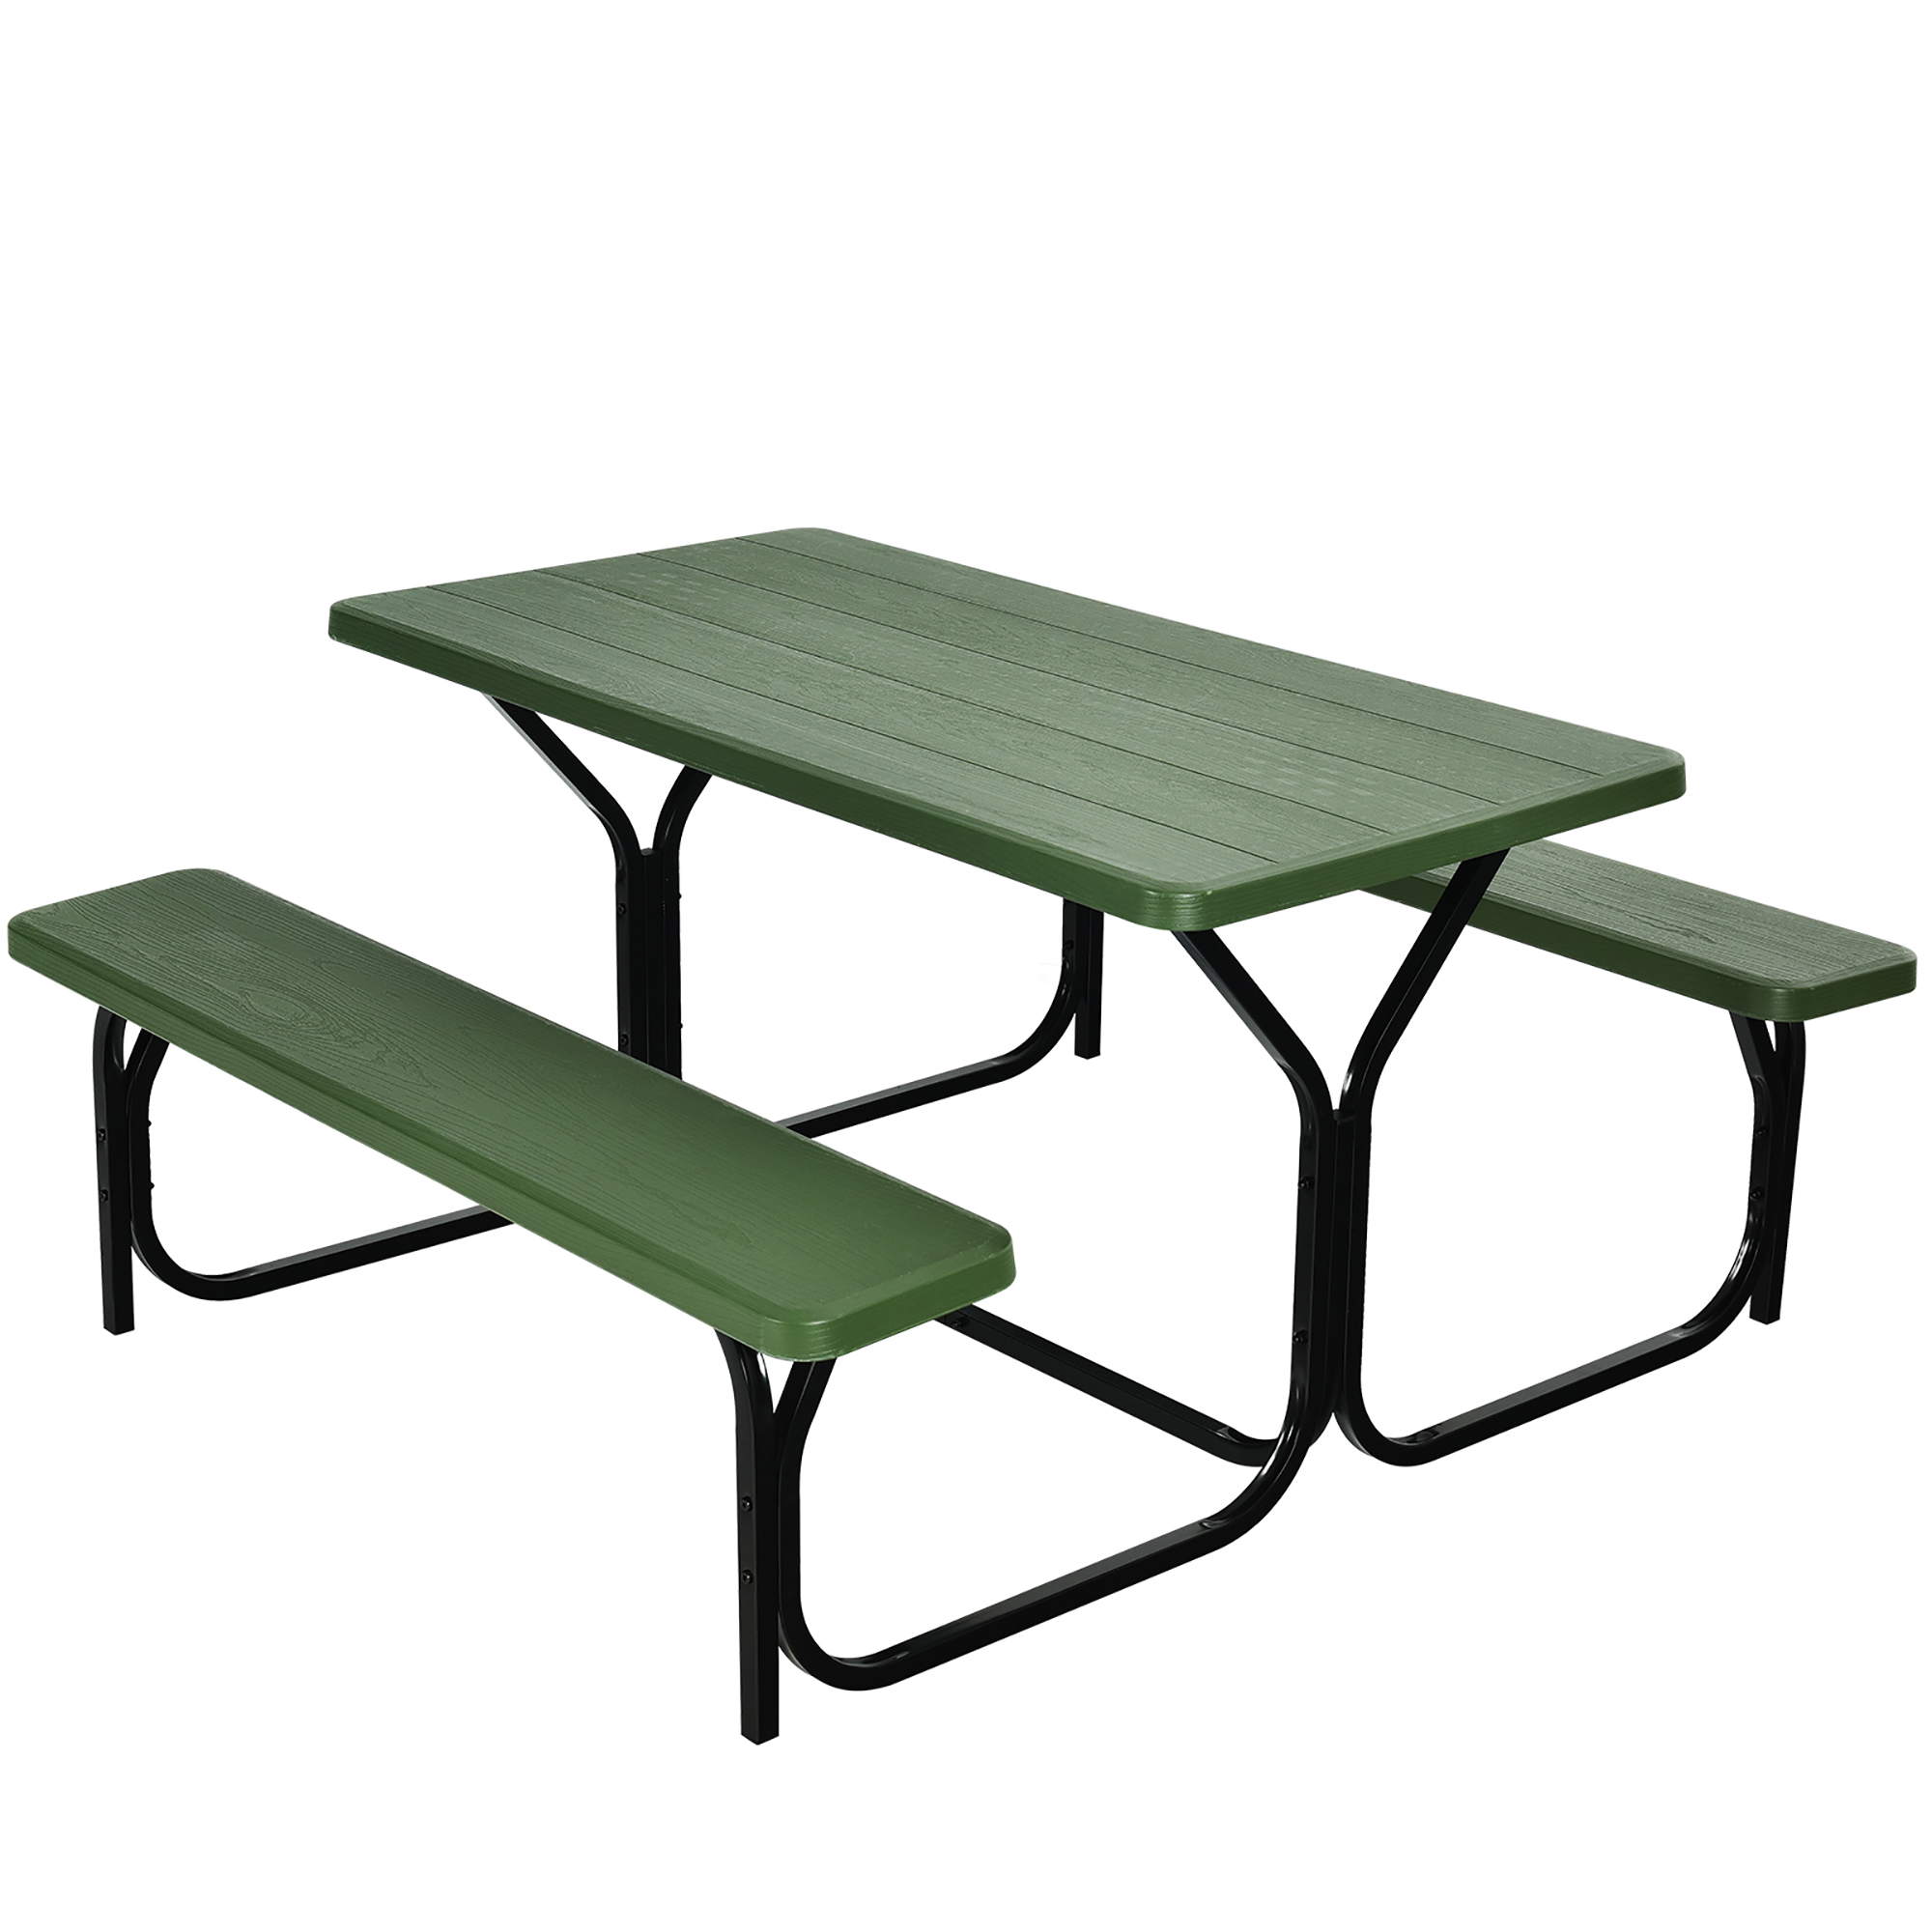 Costway Picnic Table Bench Set Outdoor Backyard Patio Garden Party Dining All Weather Green - image 2 of 10